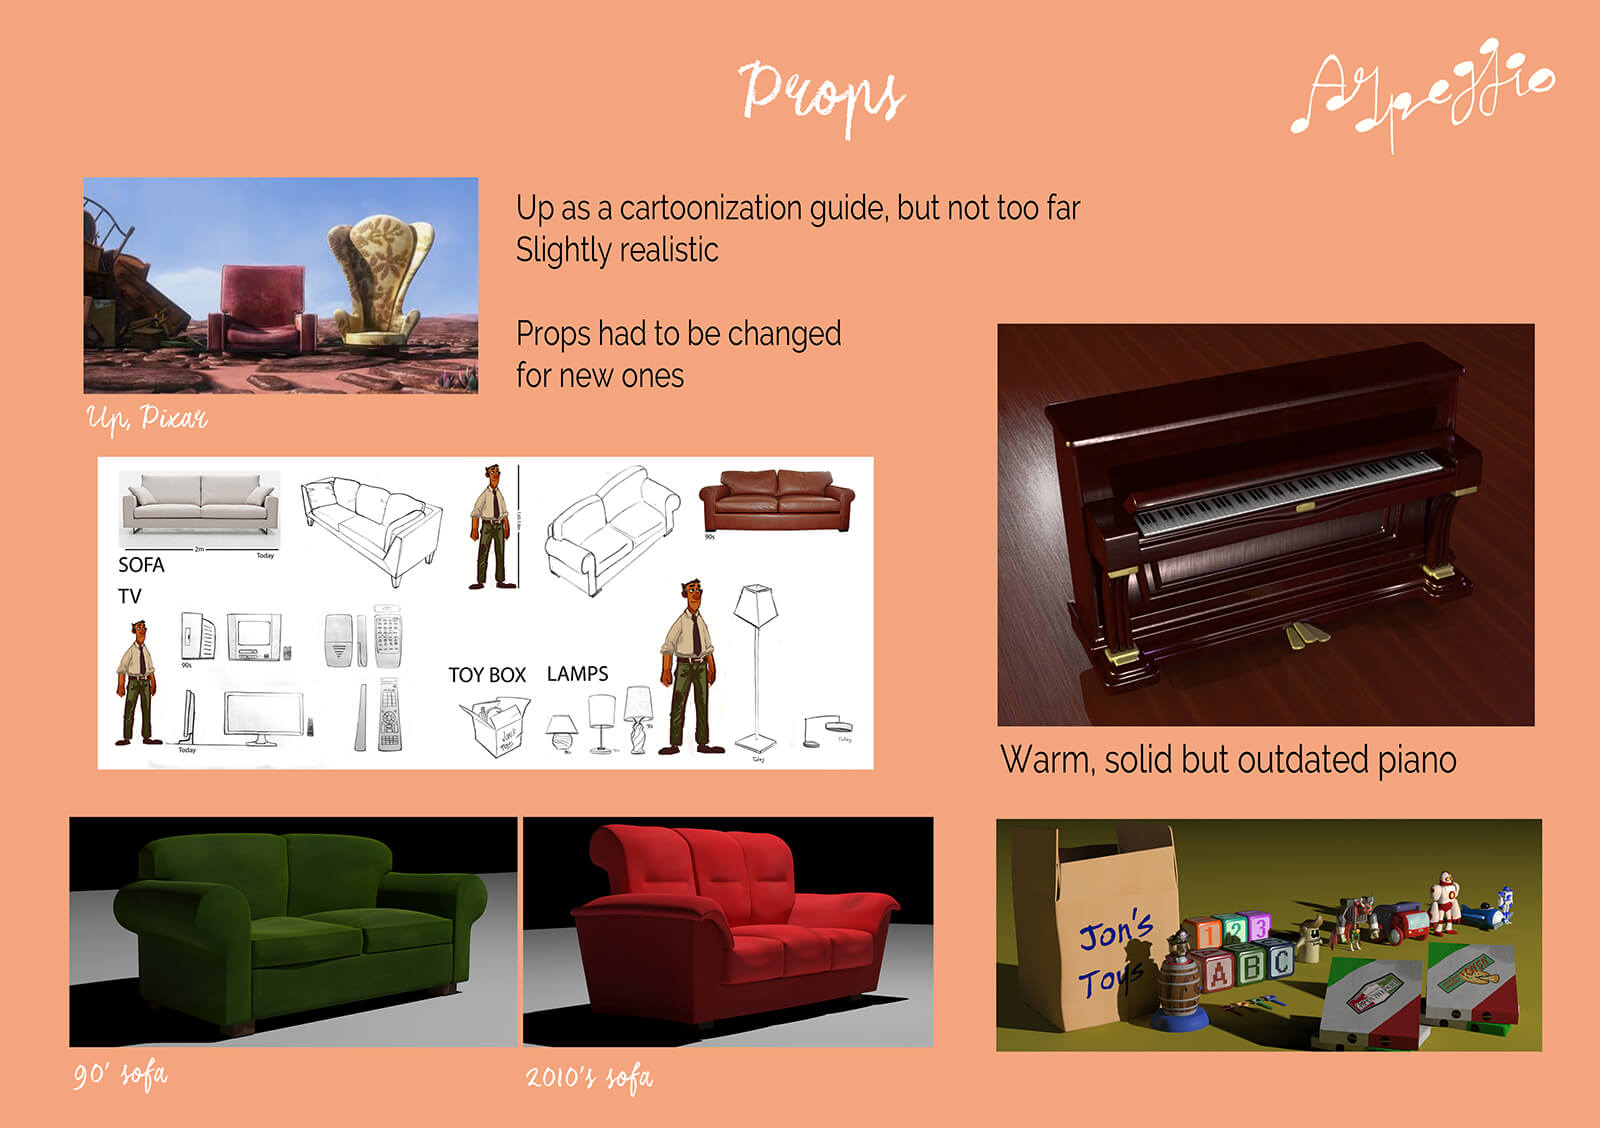 Reference and concept art and models of props for the film Arpeggio, including couches, toys, and a piano